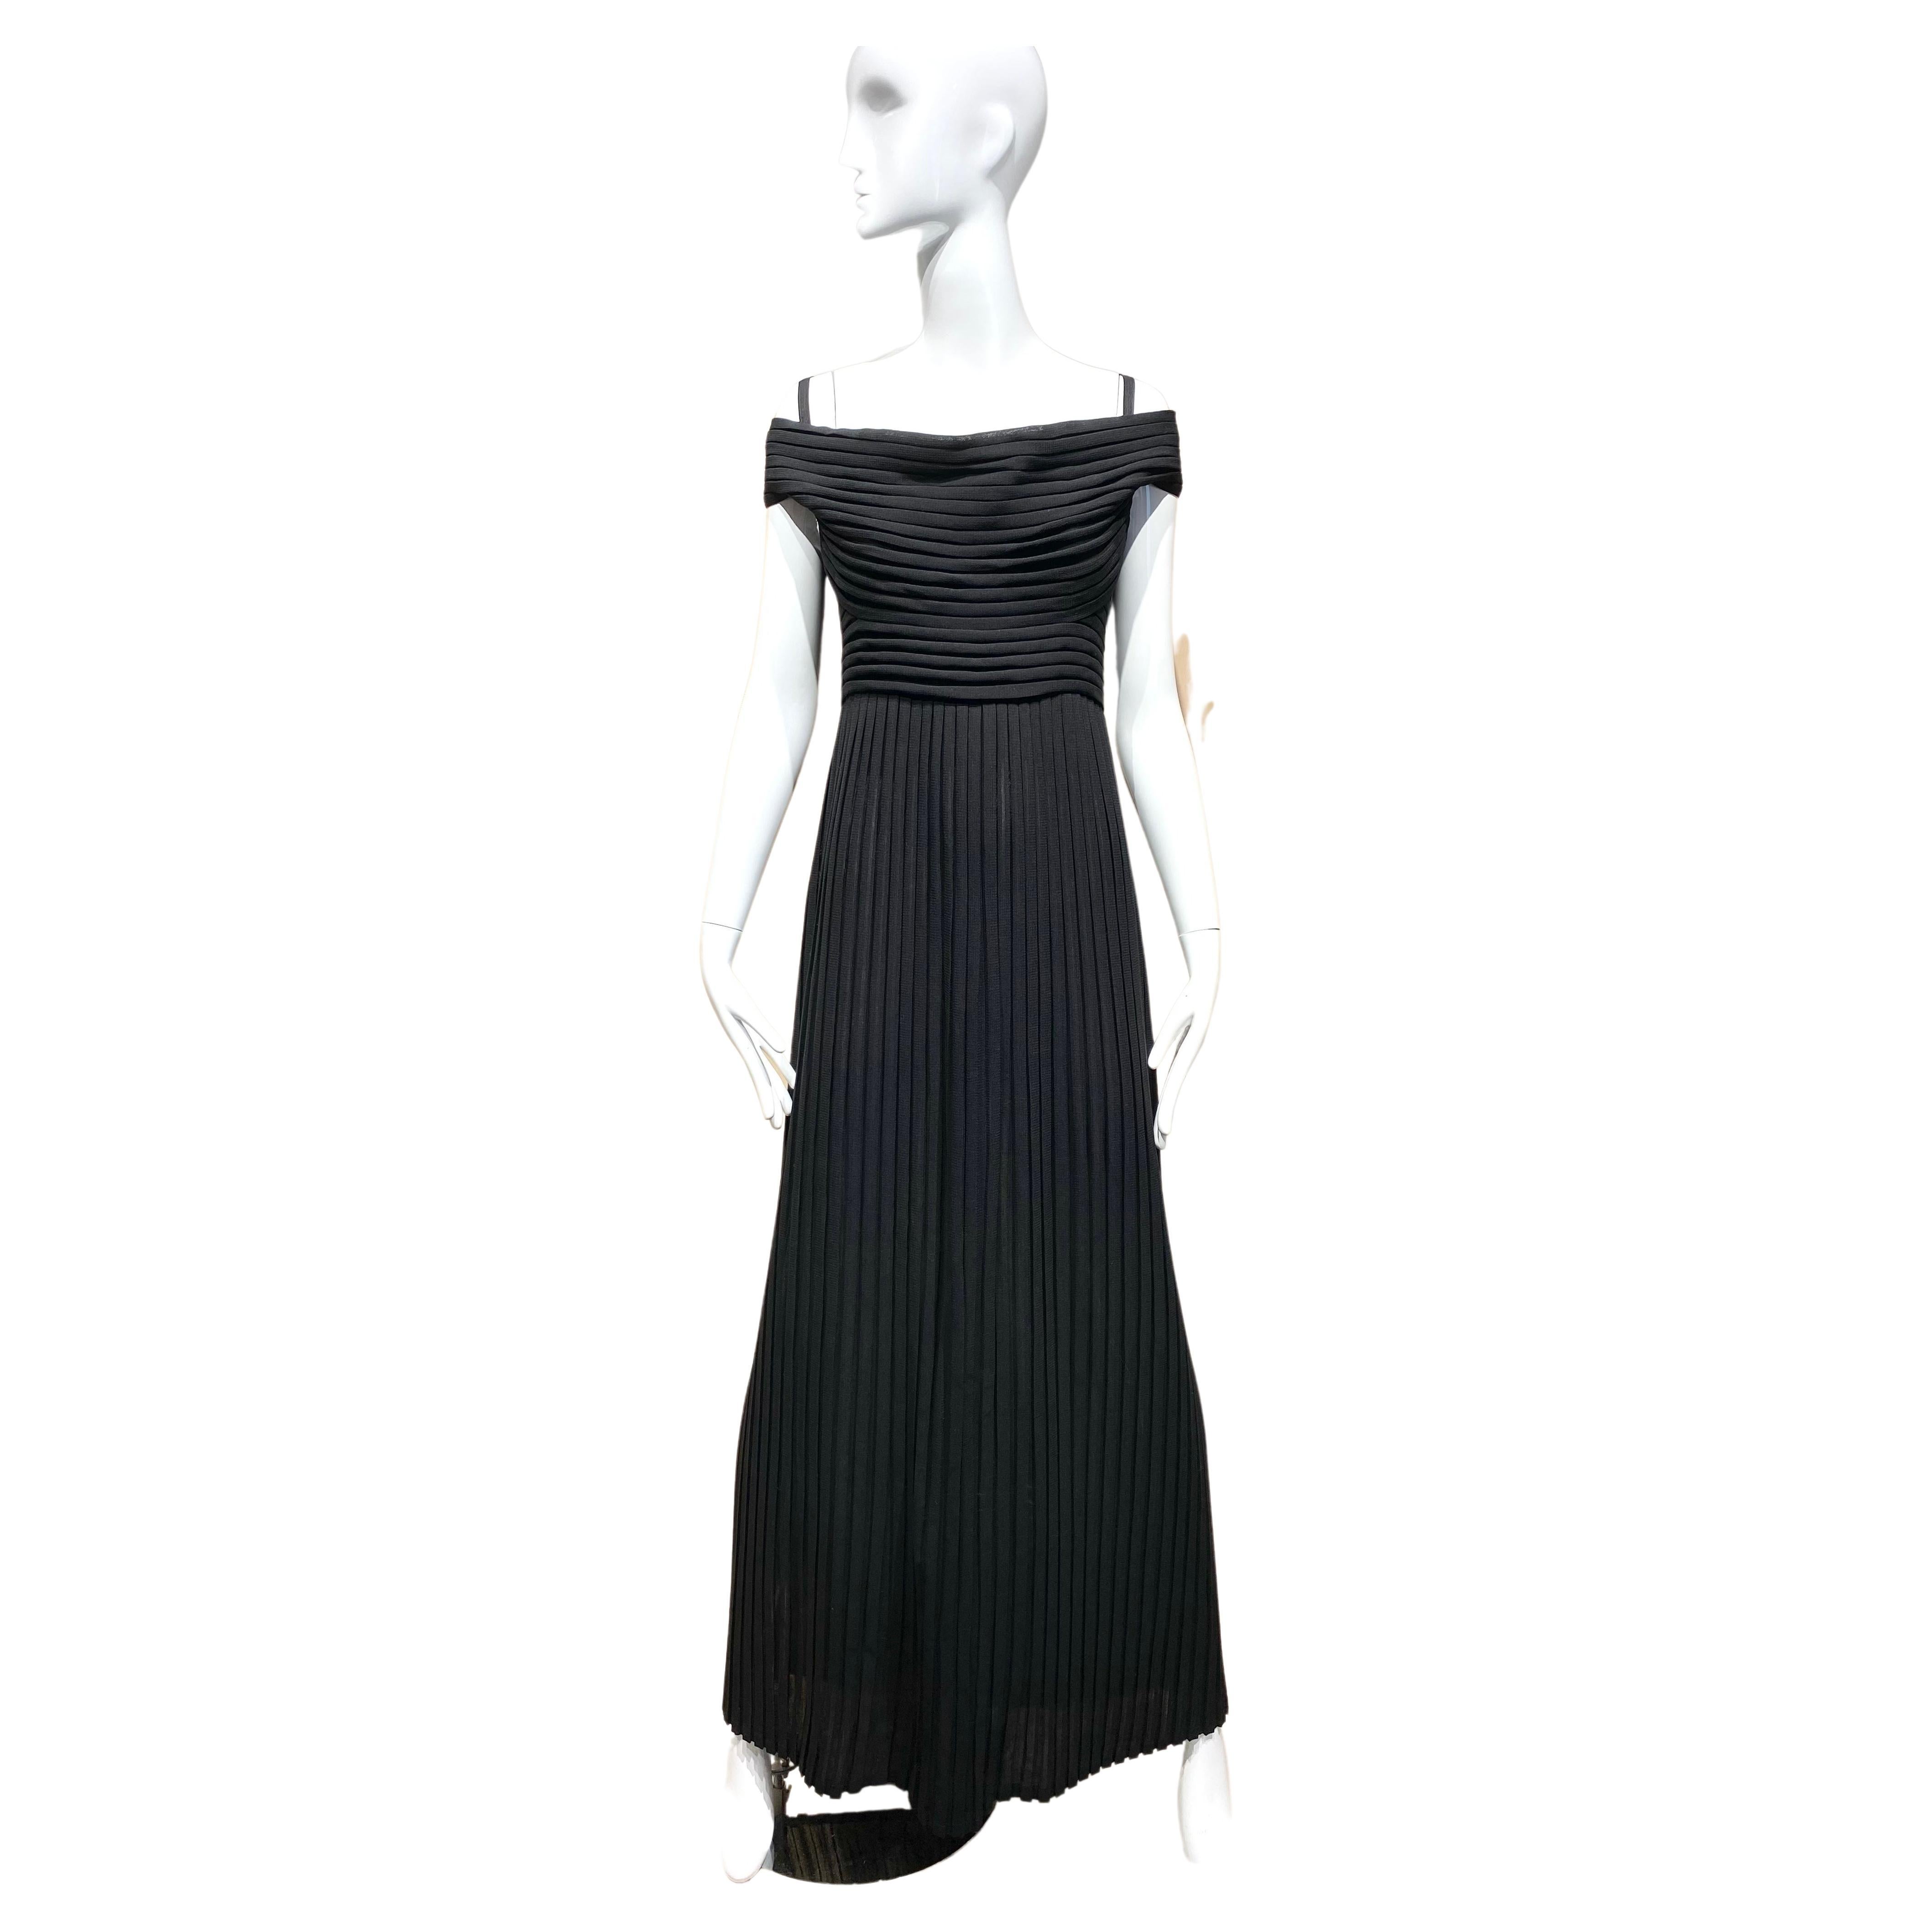 90s Gianfranco Ferre Black Pleated Gown im Angebot